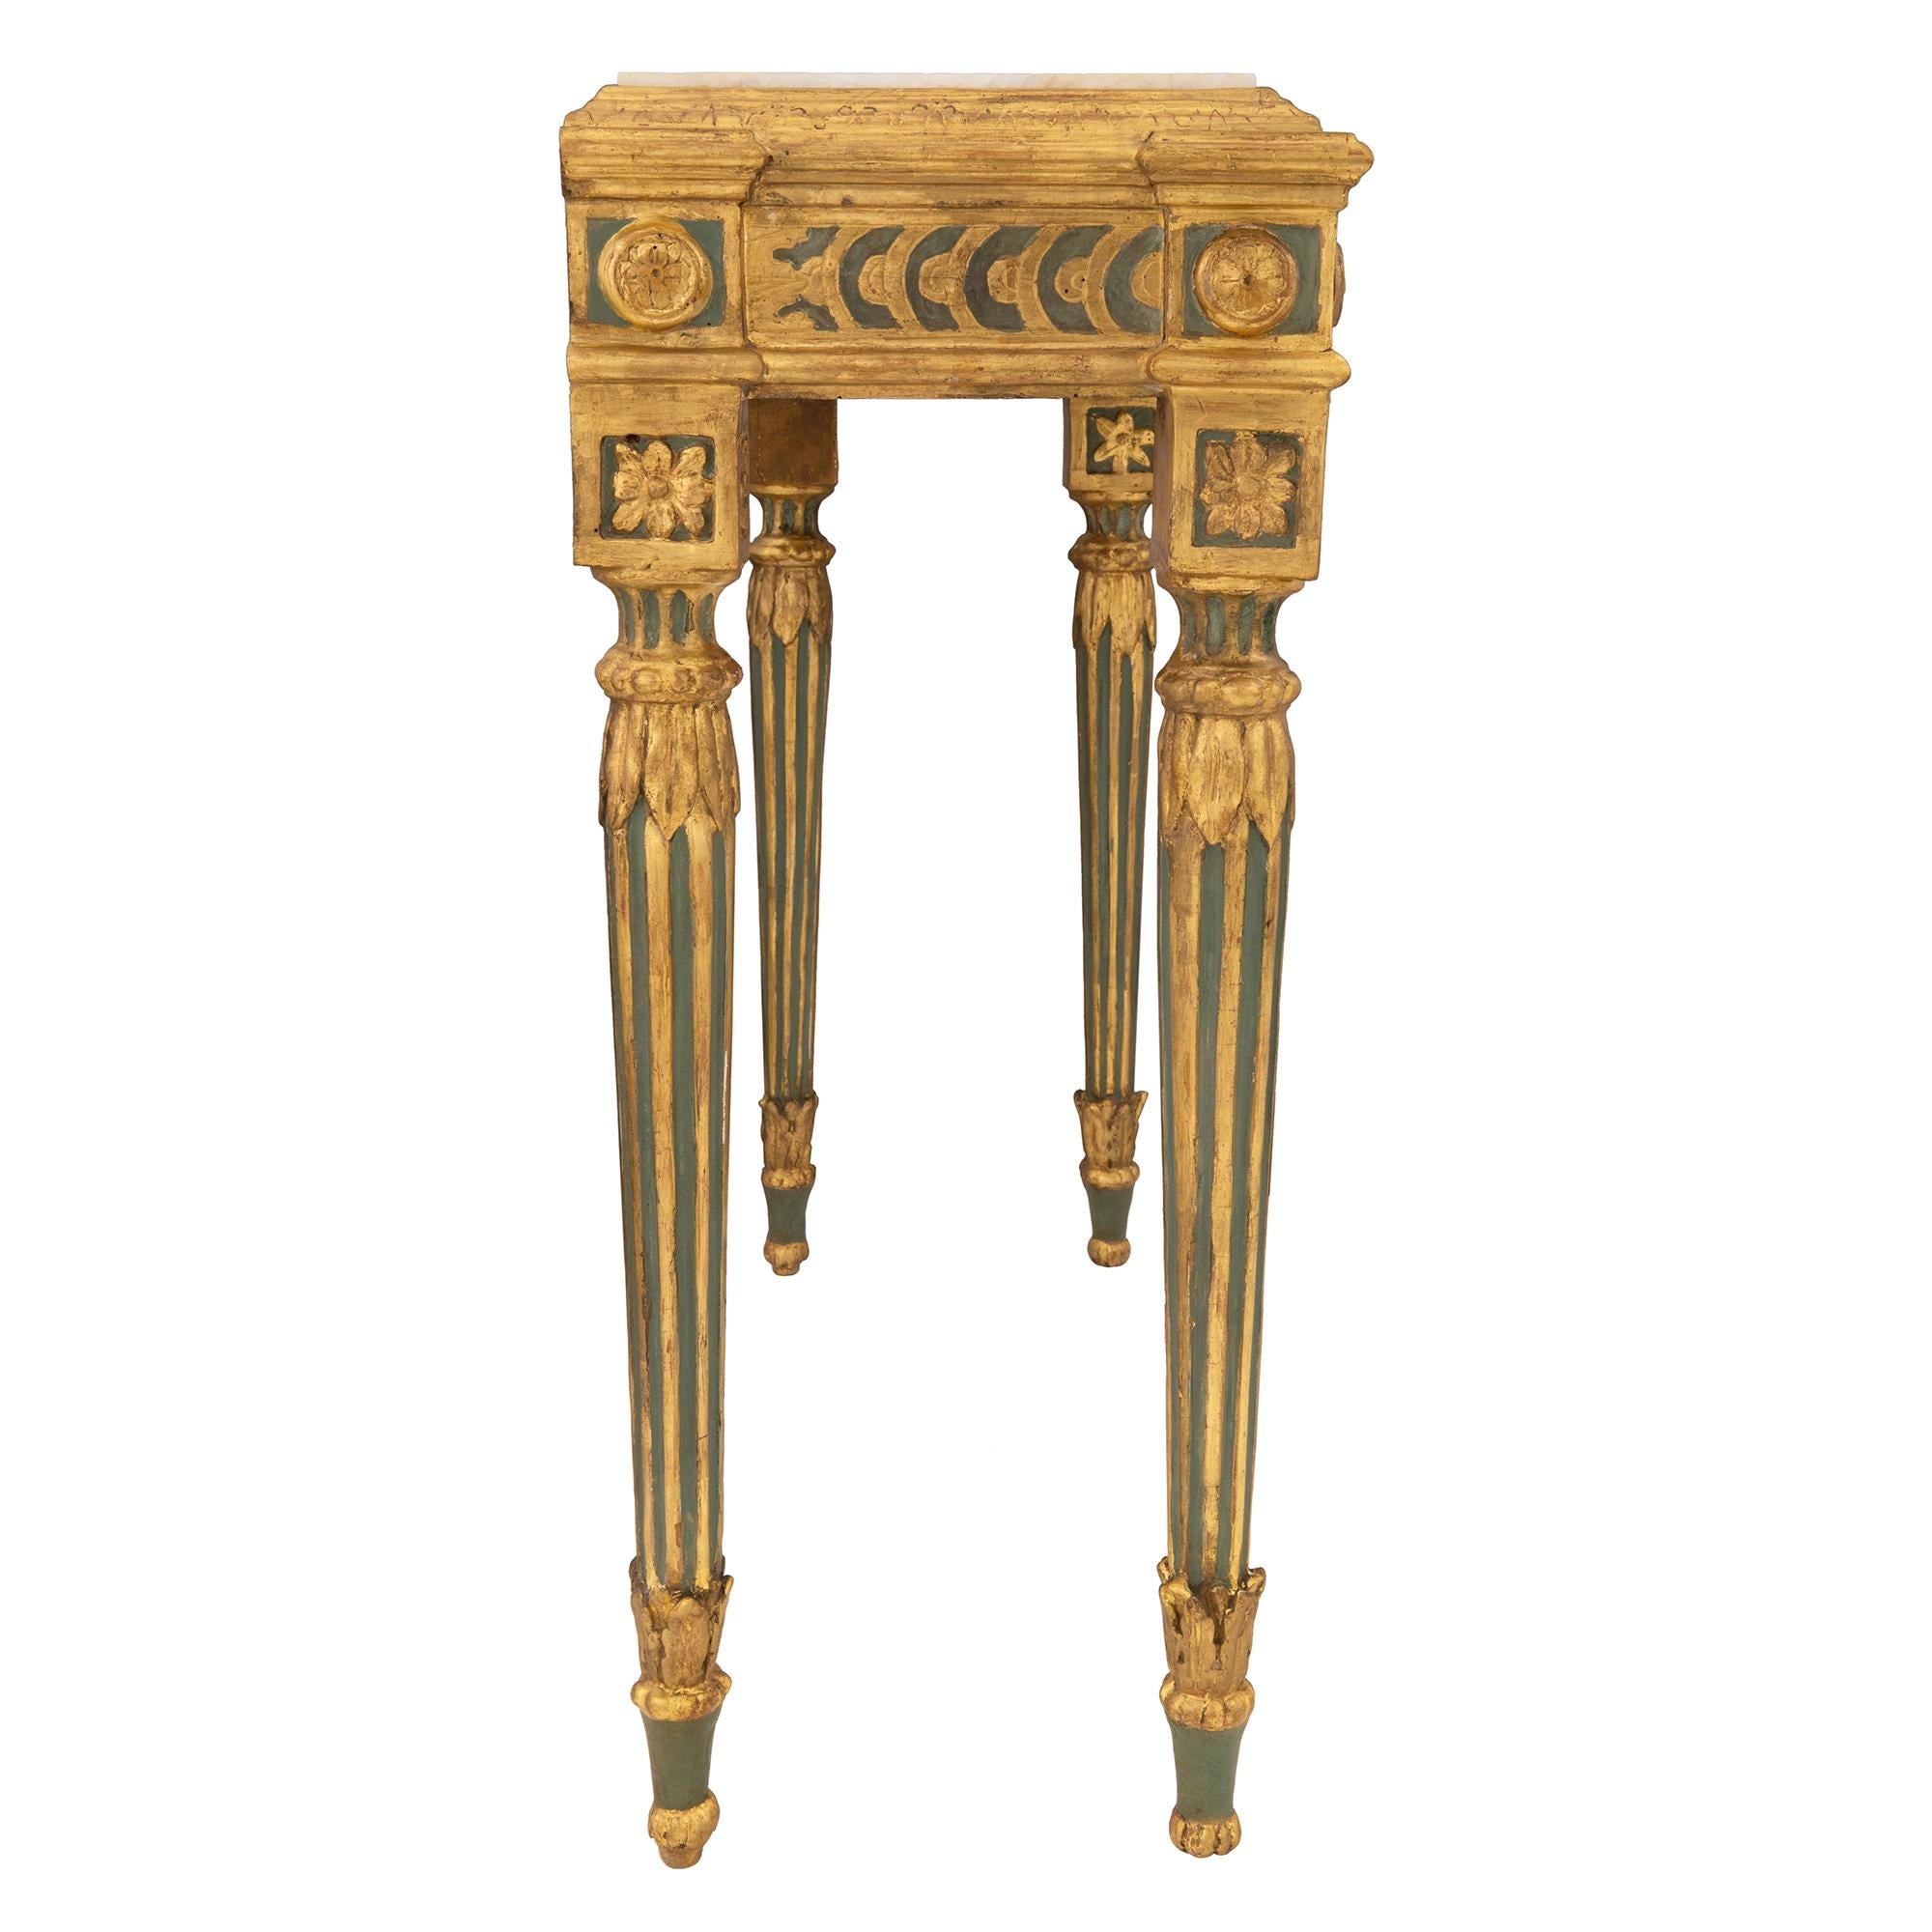 Pair of Italian 18th Century Louis XVI Period Freestanding Giltwood Consoles In Good Condition For Sale In West Palm Beach, FL